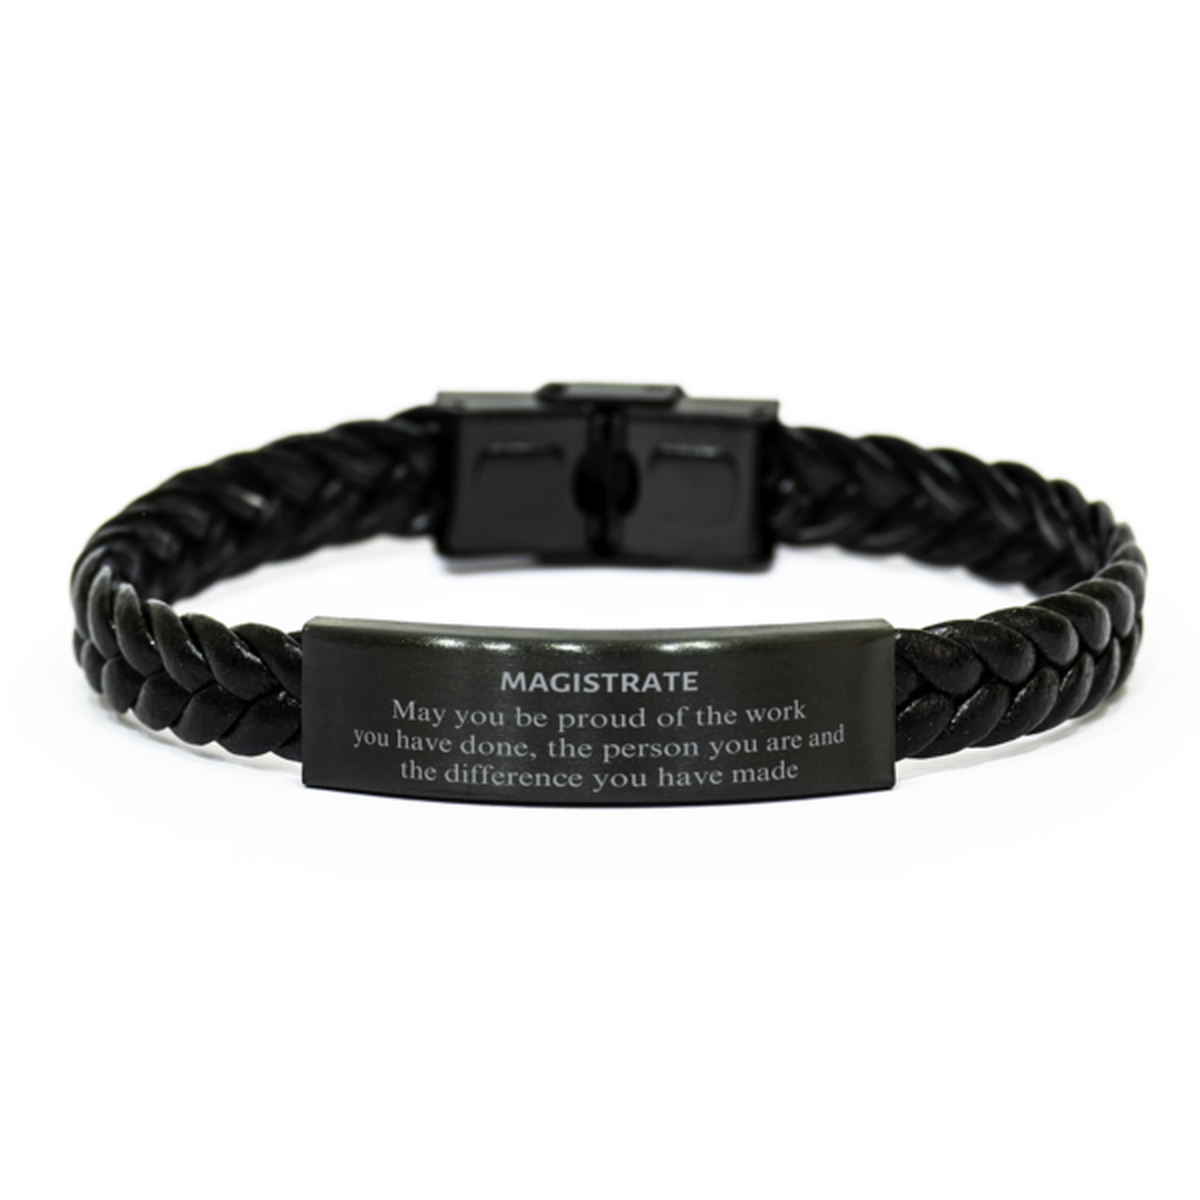 Magistrate May you be proud of the work you have done, Retirement Magistrate Braided Leather Bracelet for Colleague Appreciation Gifts Amazing for Magistrate